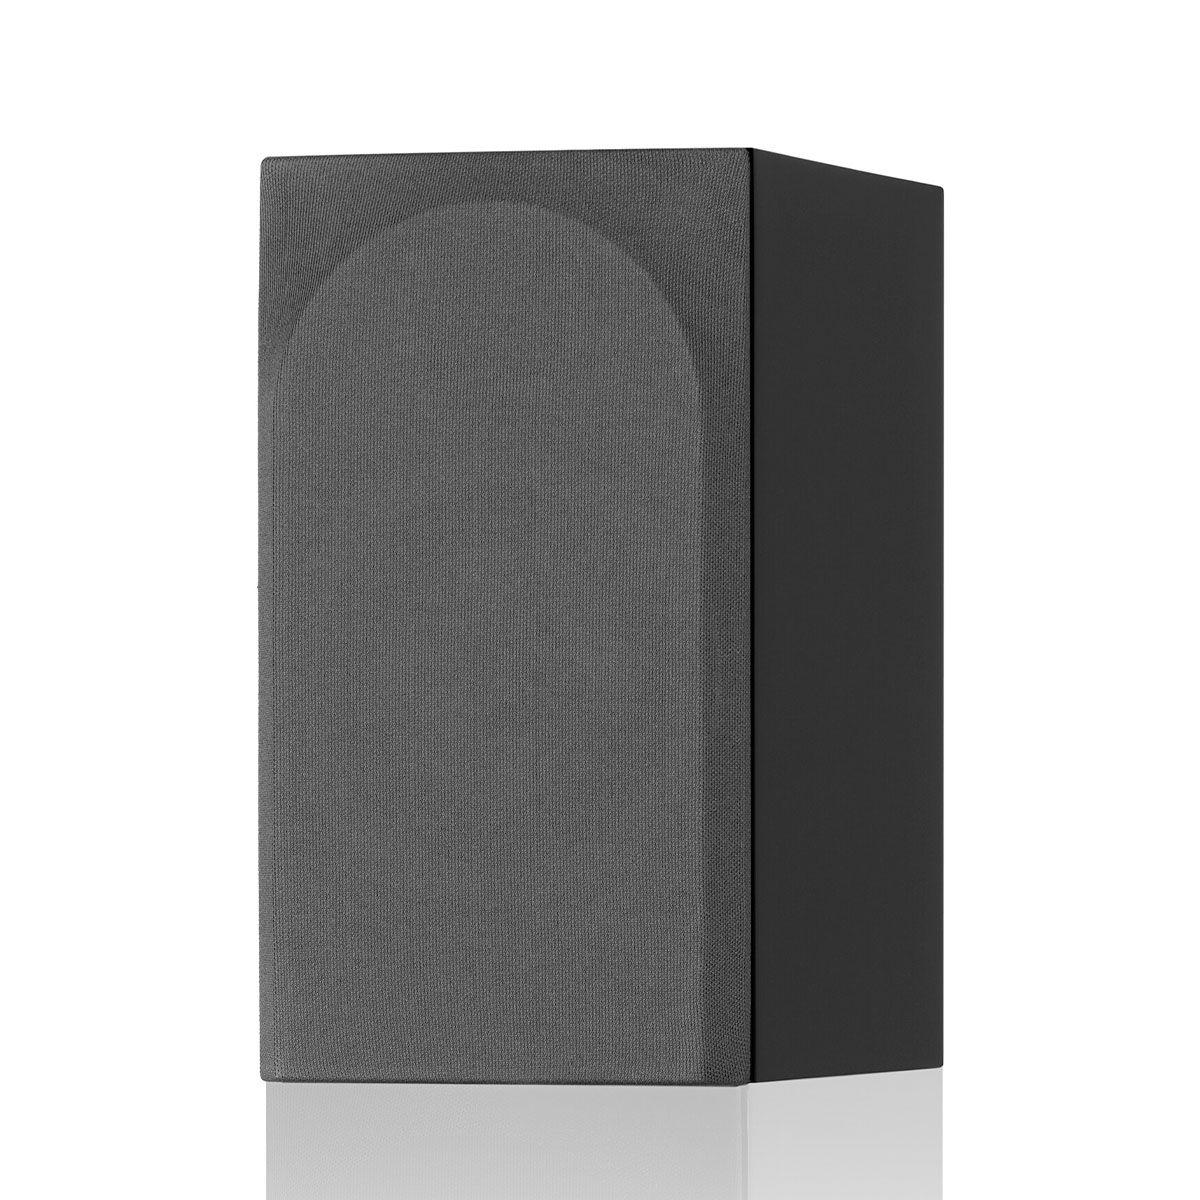 Bowers & Wilkins 707 S3 2-Way Stand Mount Bookshelf Loudspeakers - Gloss Black - Pair - angle shot with grile